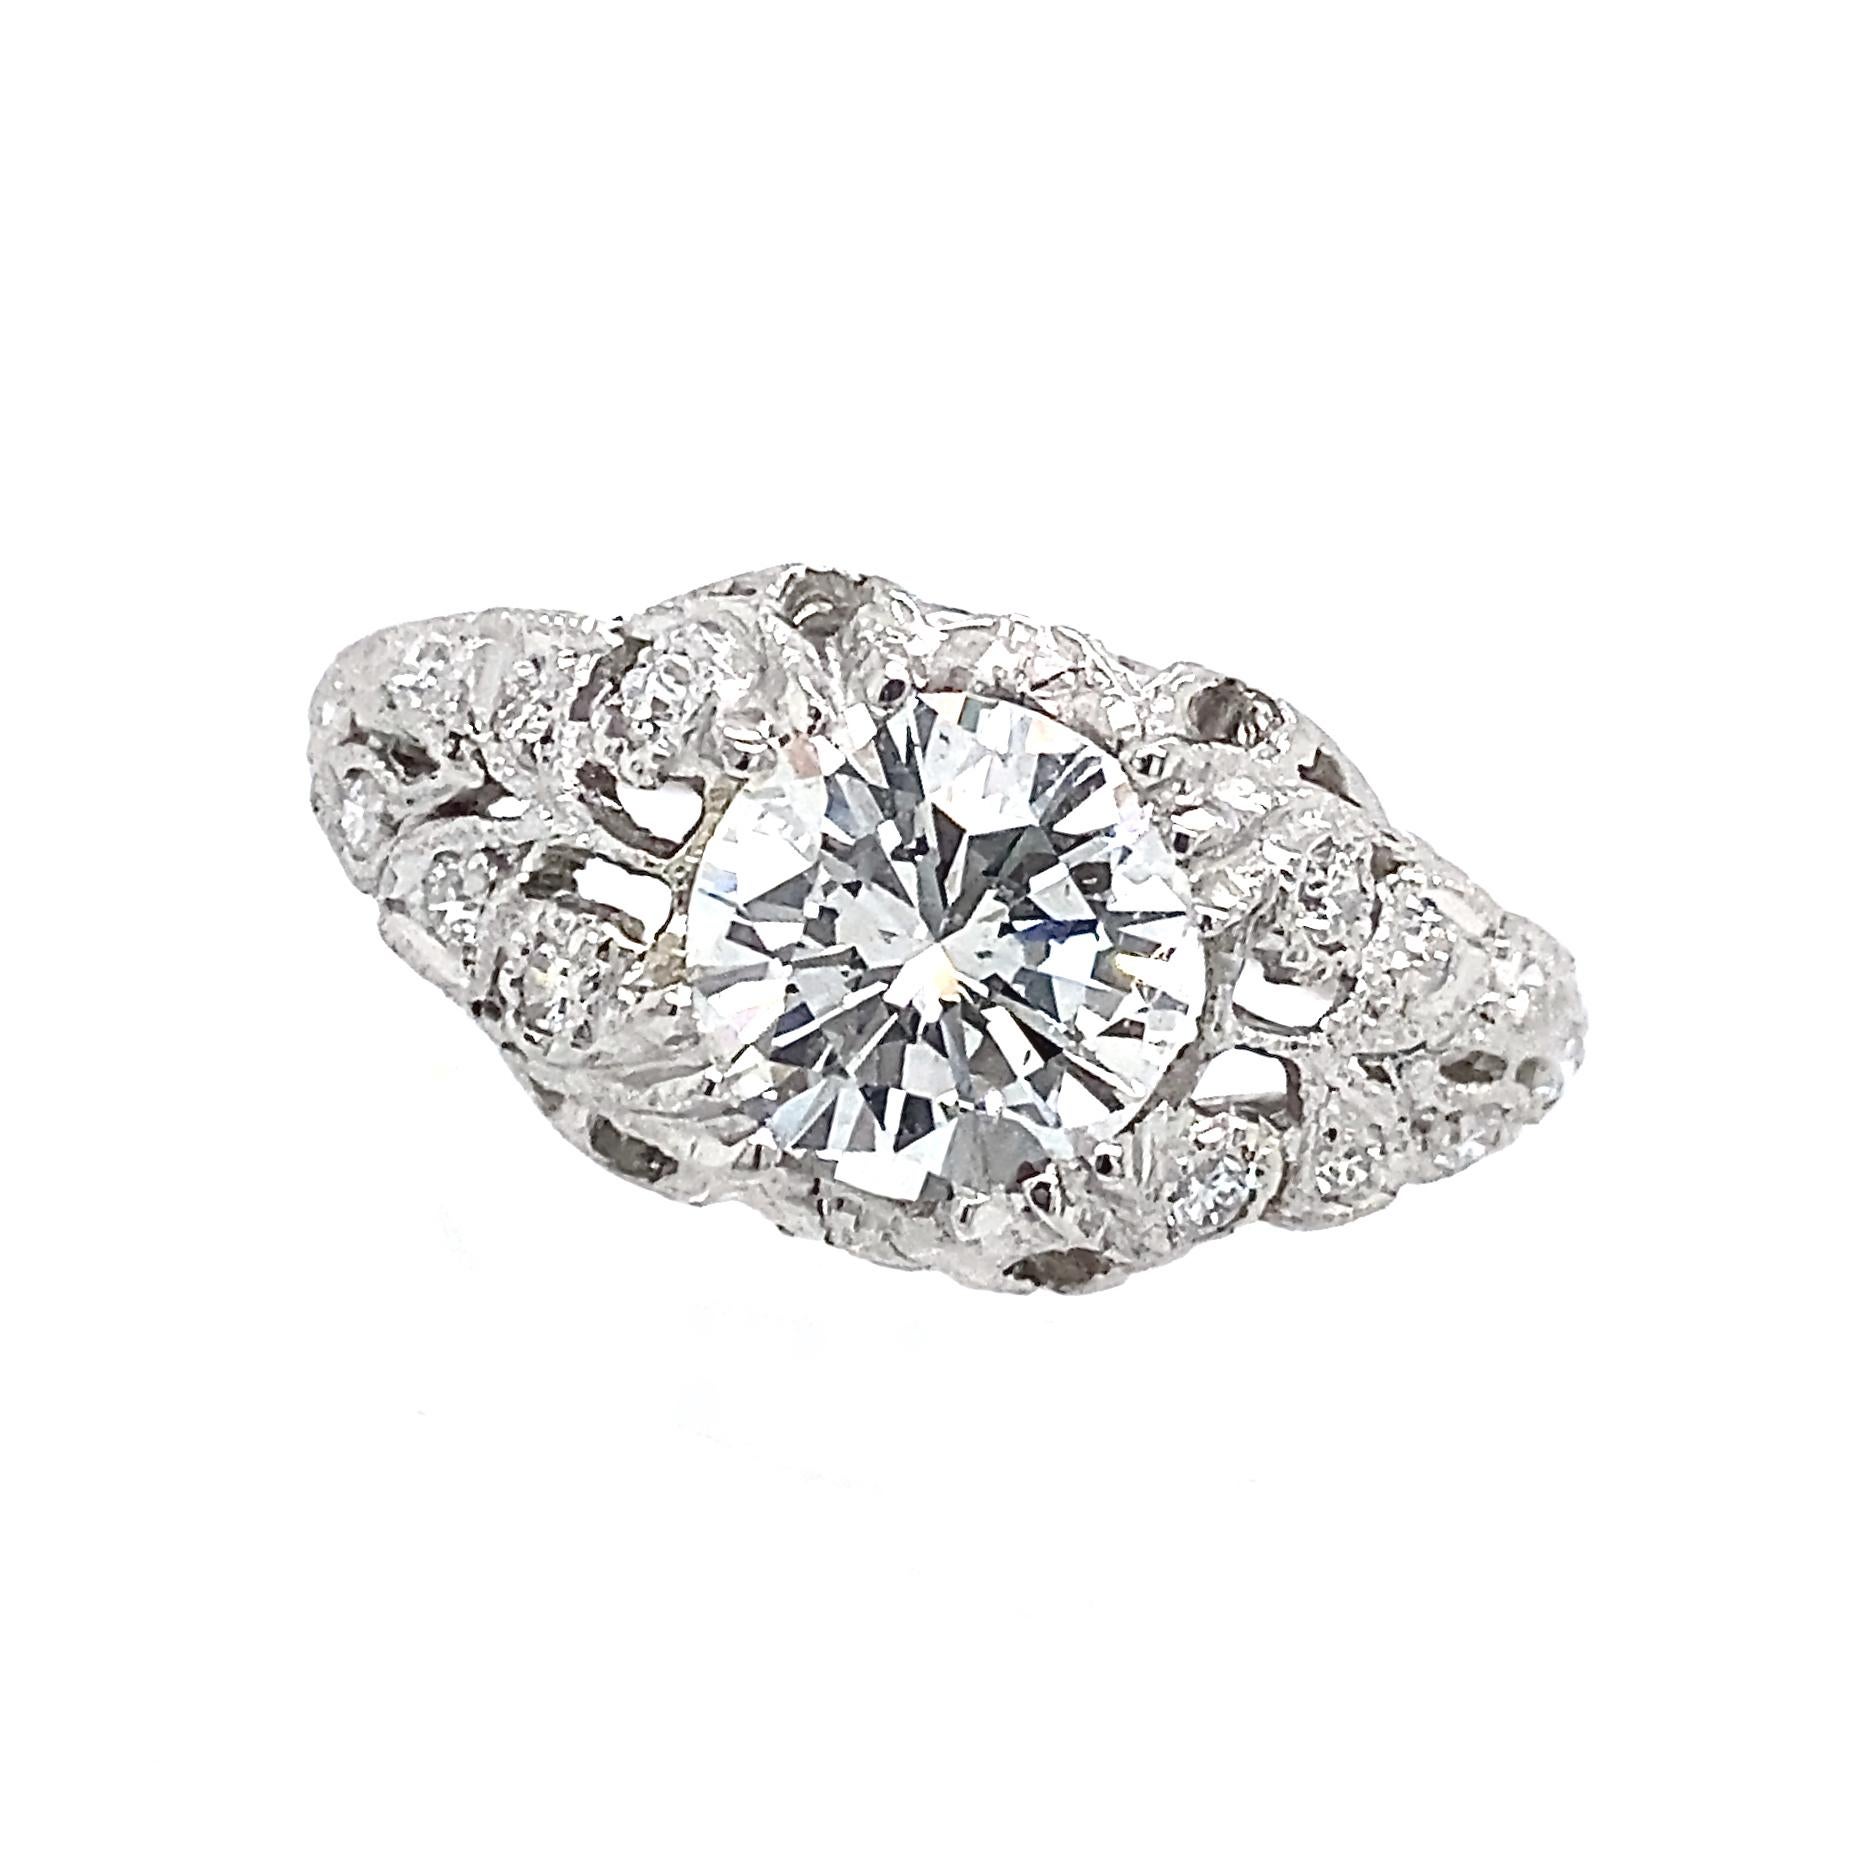 Eytan Brandes drew on elements of various Edwardian rings -- the leafy motif, the coin-edged foliate plates, the rising silhouette -- to create this lovely platinum engagement ring.  

The center diamond has an older (2002) EGL certificate